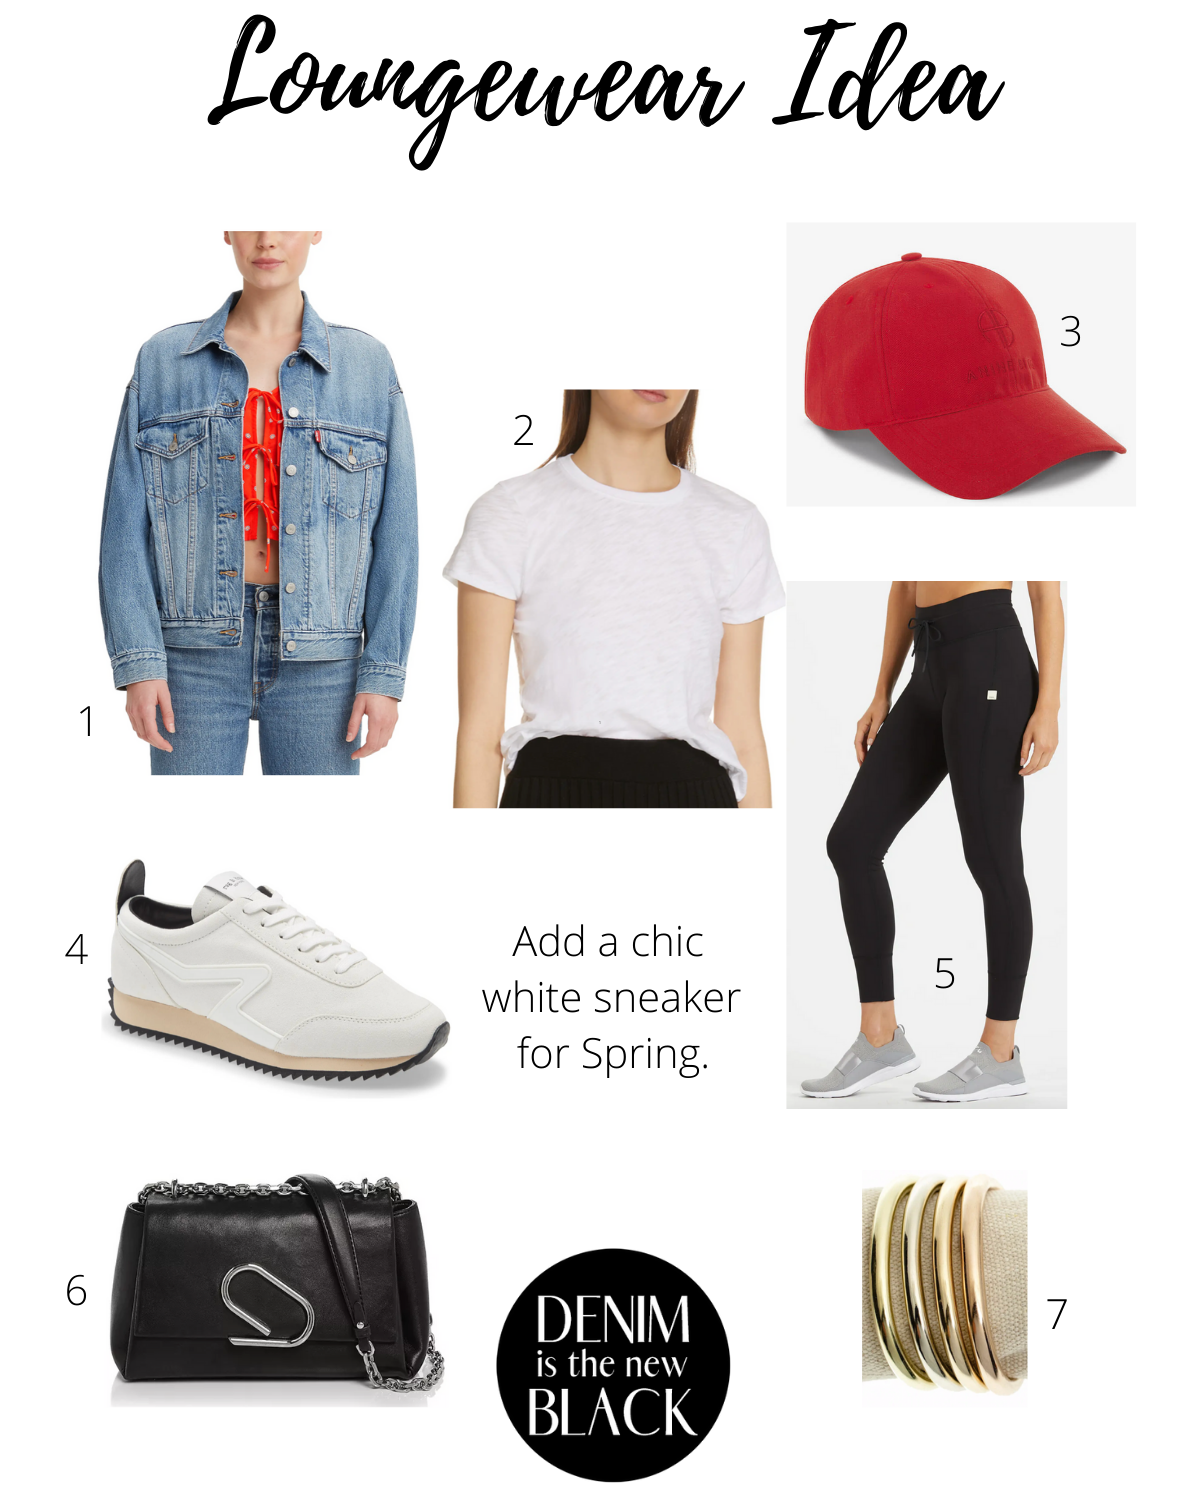 How to look good in loungewear for spring with a Levi's Trucker denim jacket.